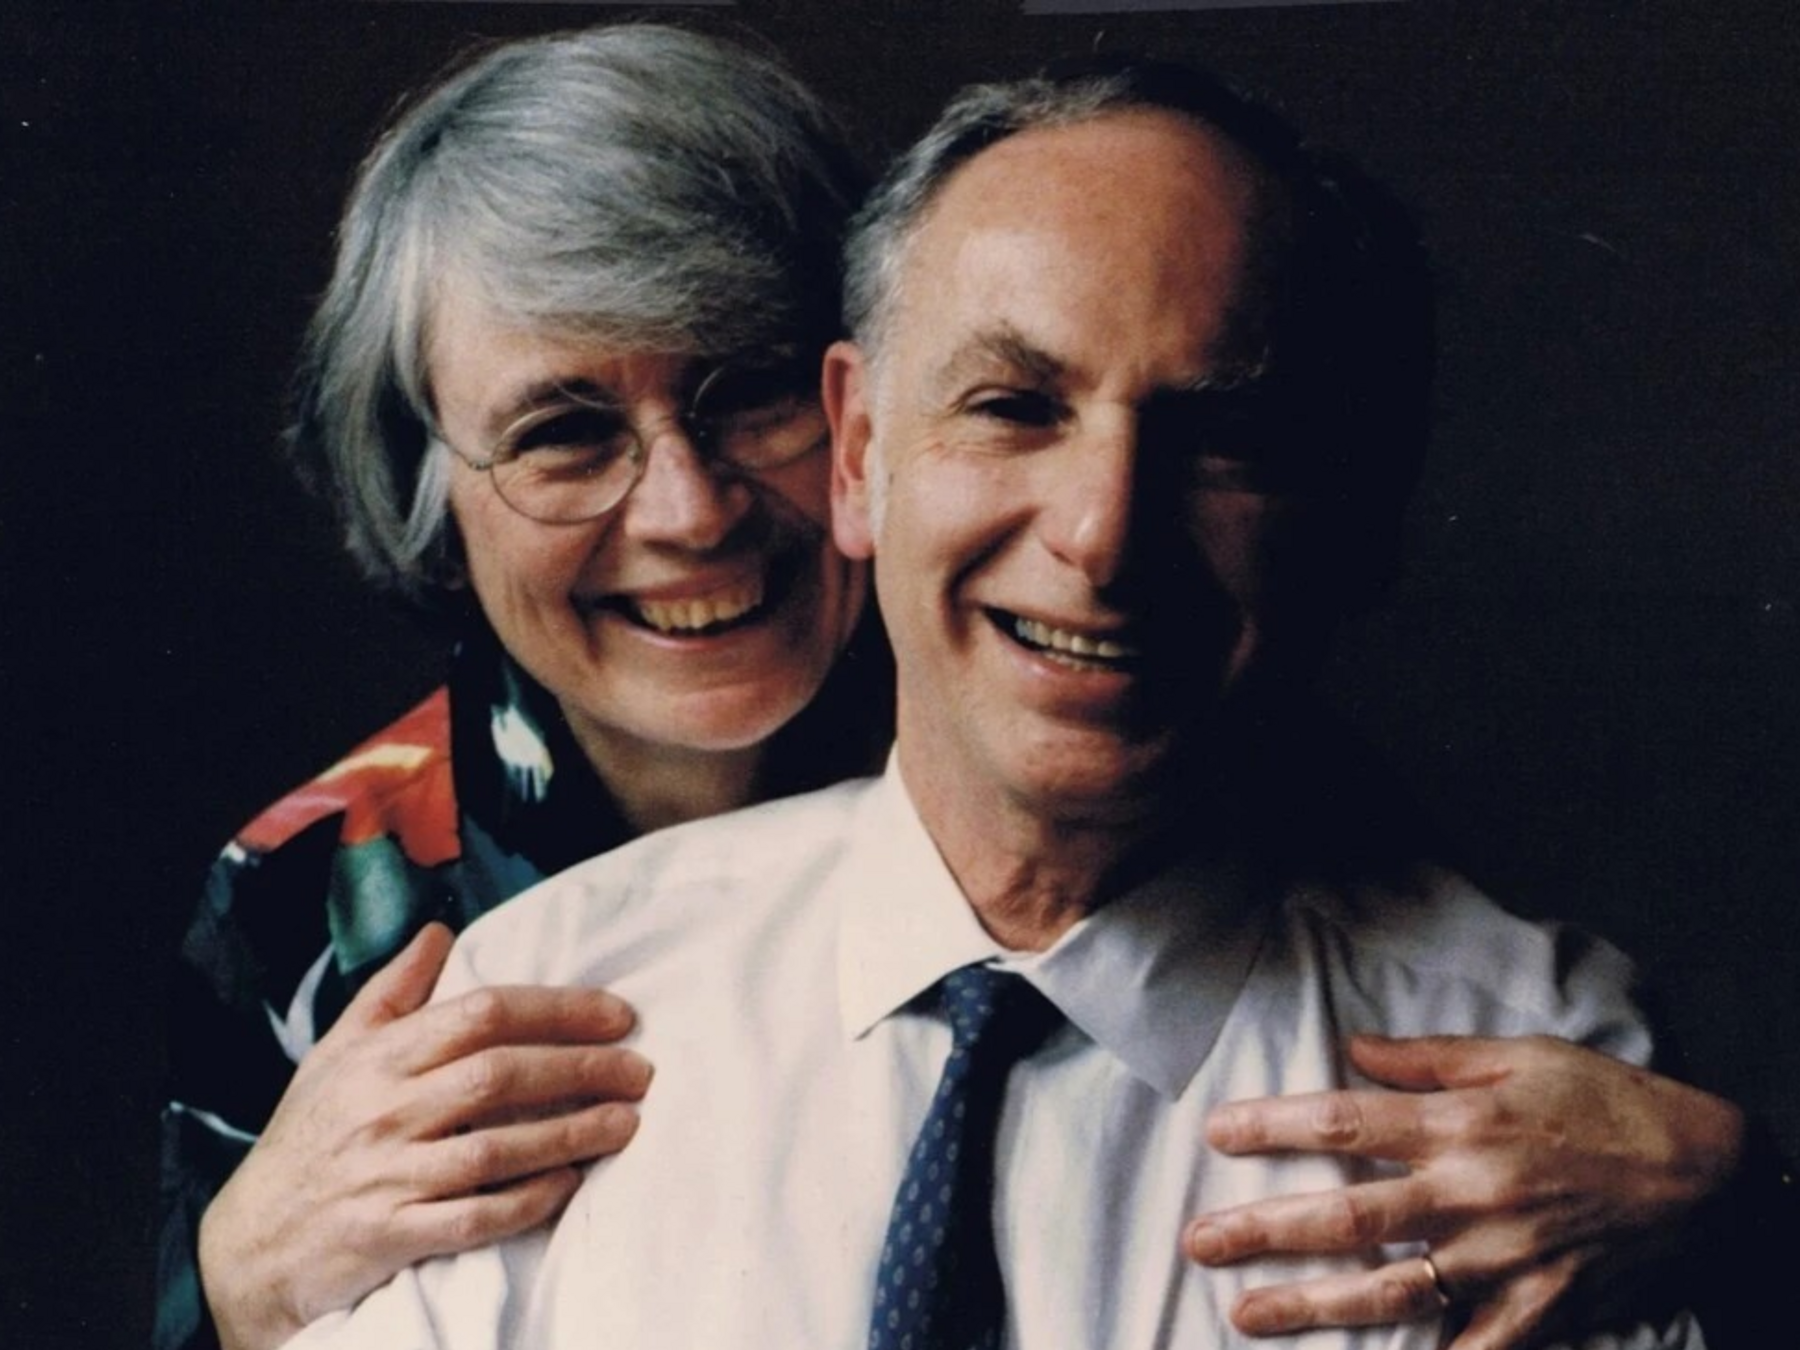 Dr. Mary and Philip Seeman